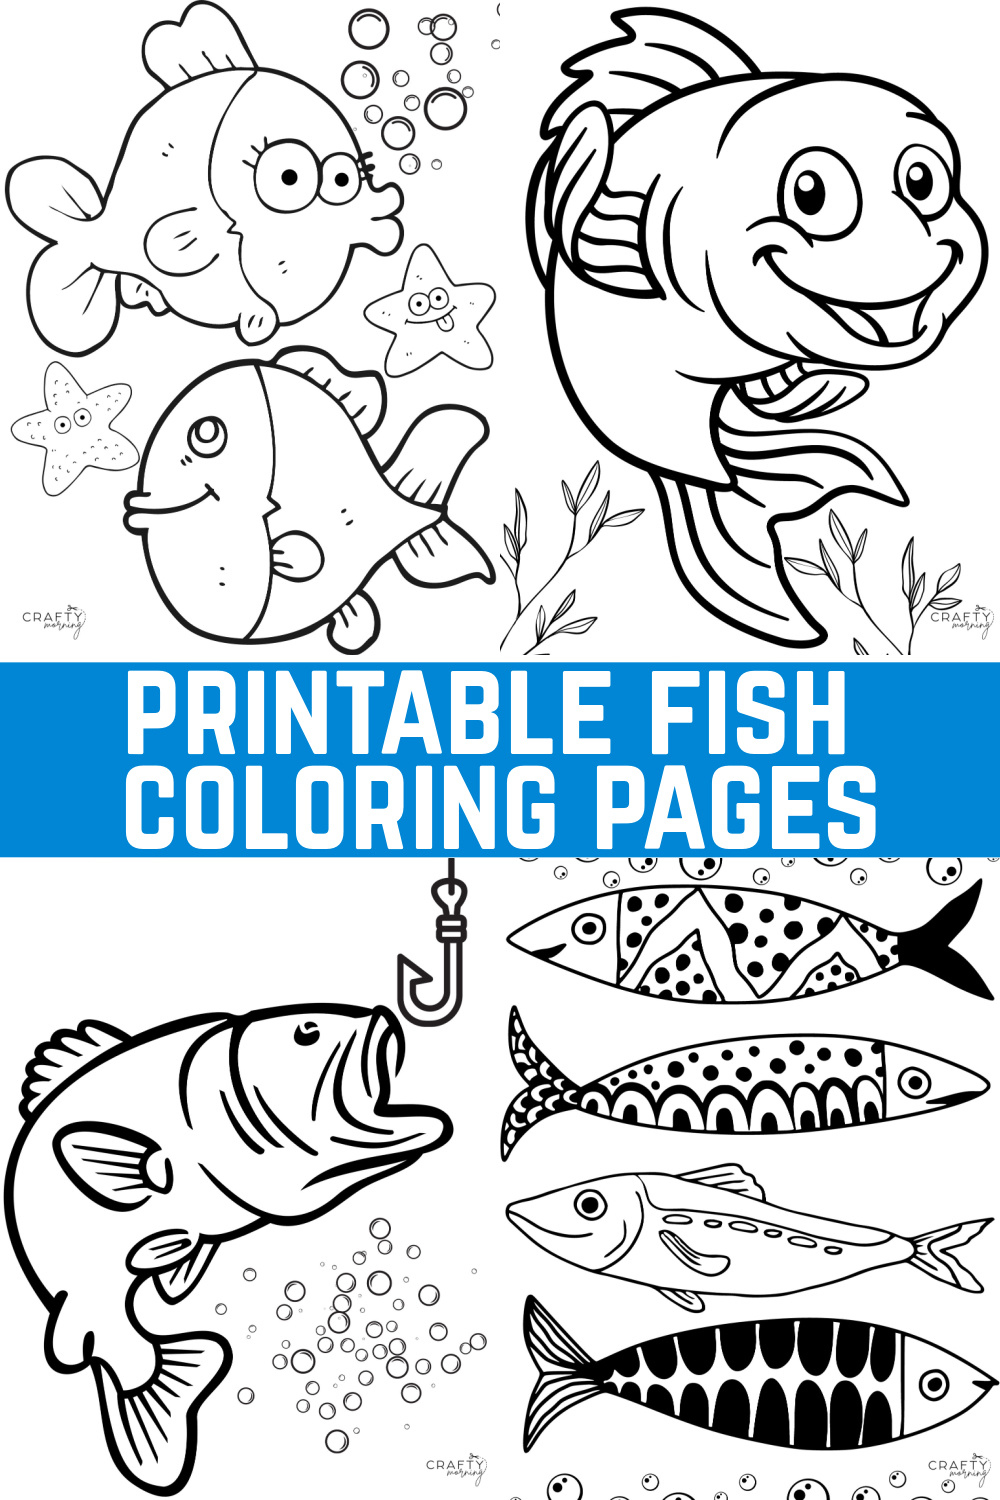 Printable Fish Coloring Pages - Crafty Morning inside Free Printable Fish Coloring Pages